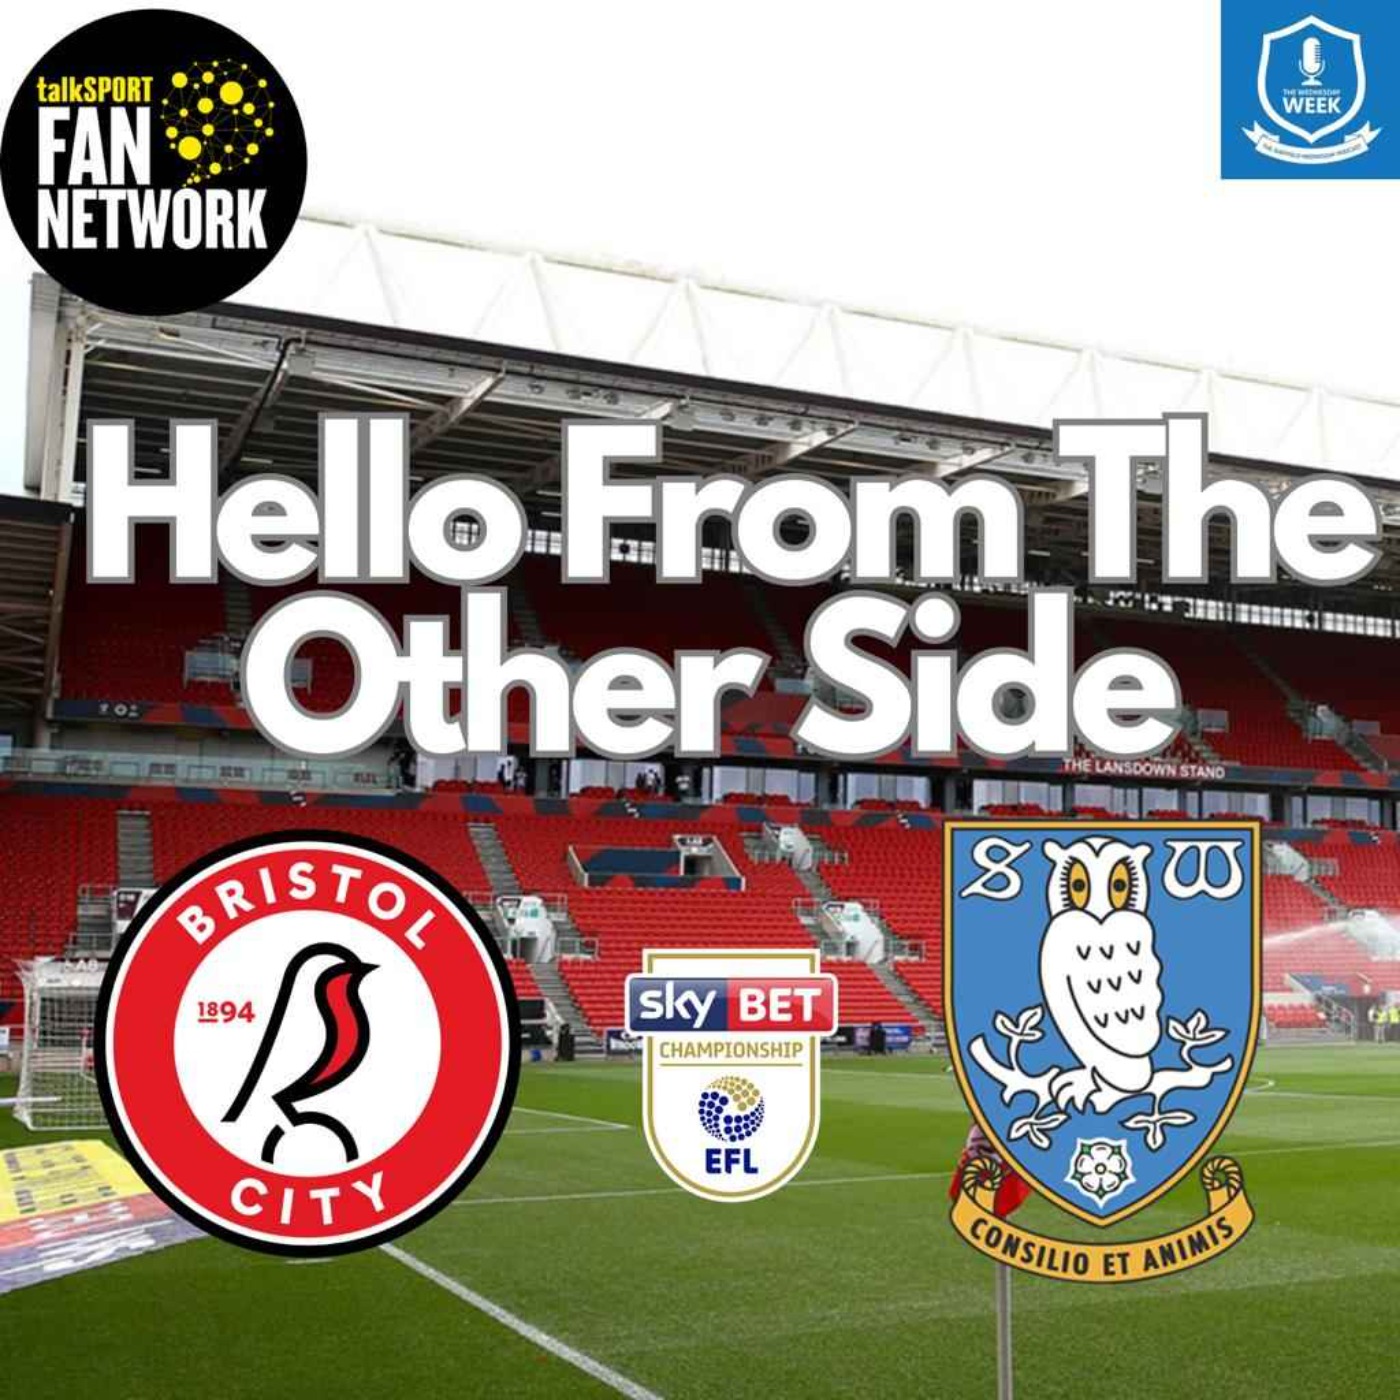 Hello From the Other Side - Bristol City